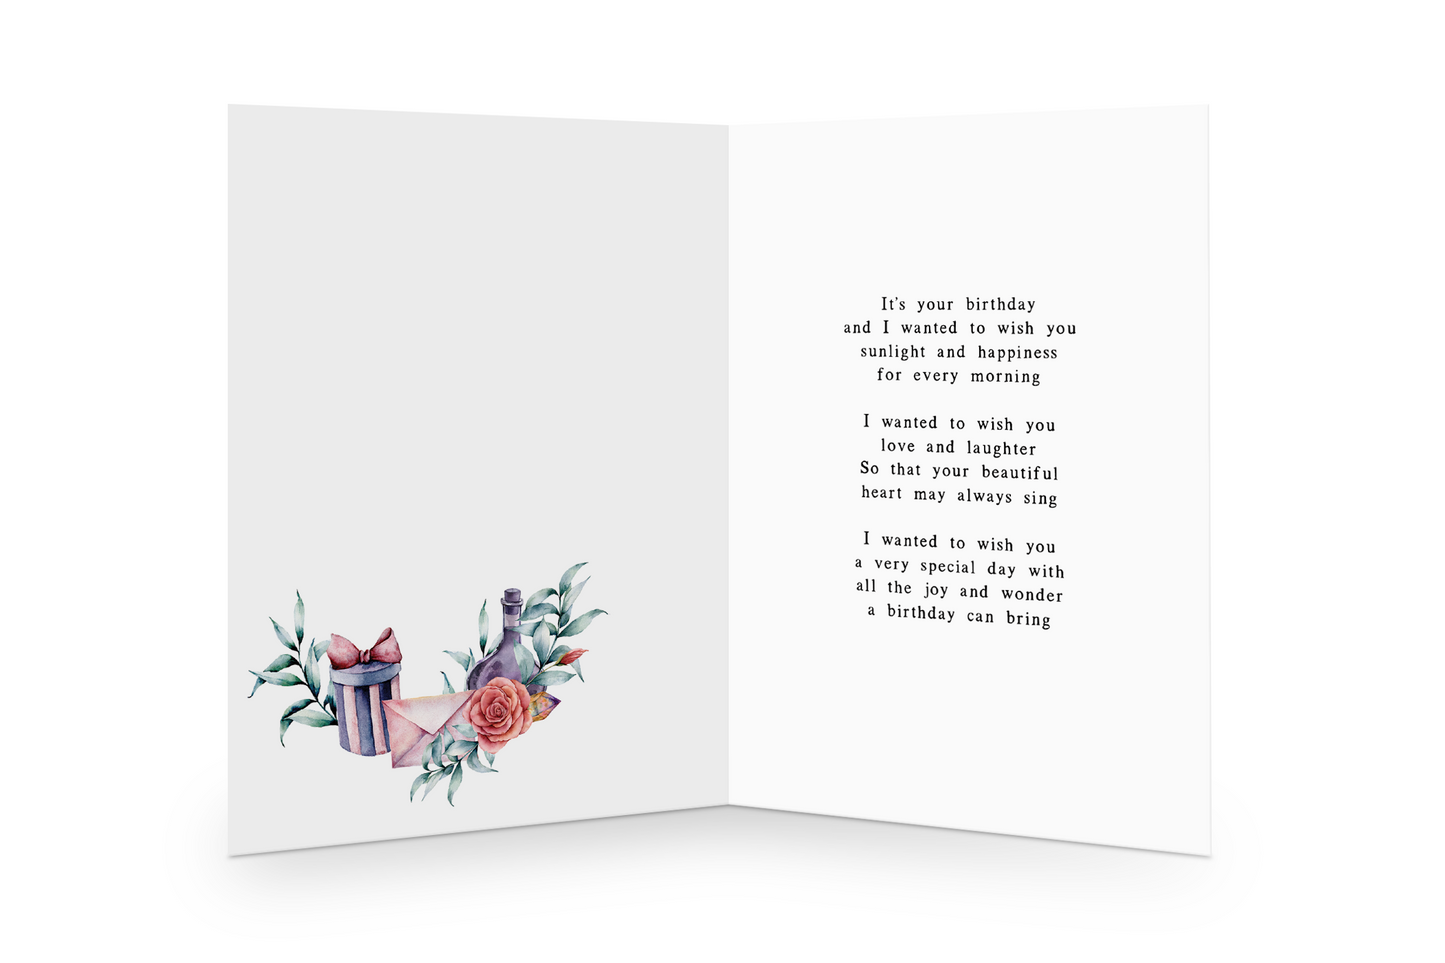 Birthday Poem inside greeting card by author Courtney Peppernell